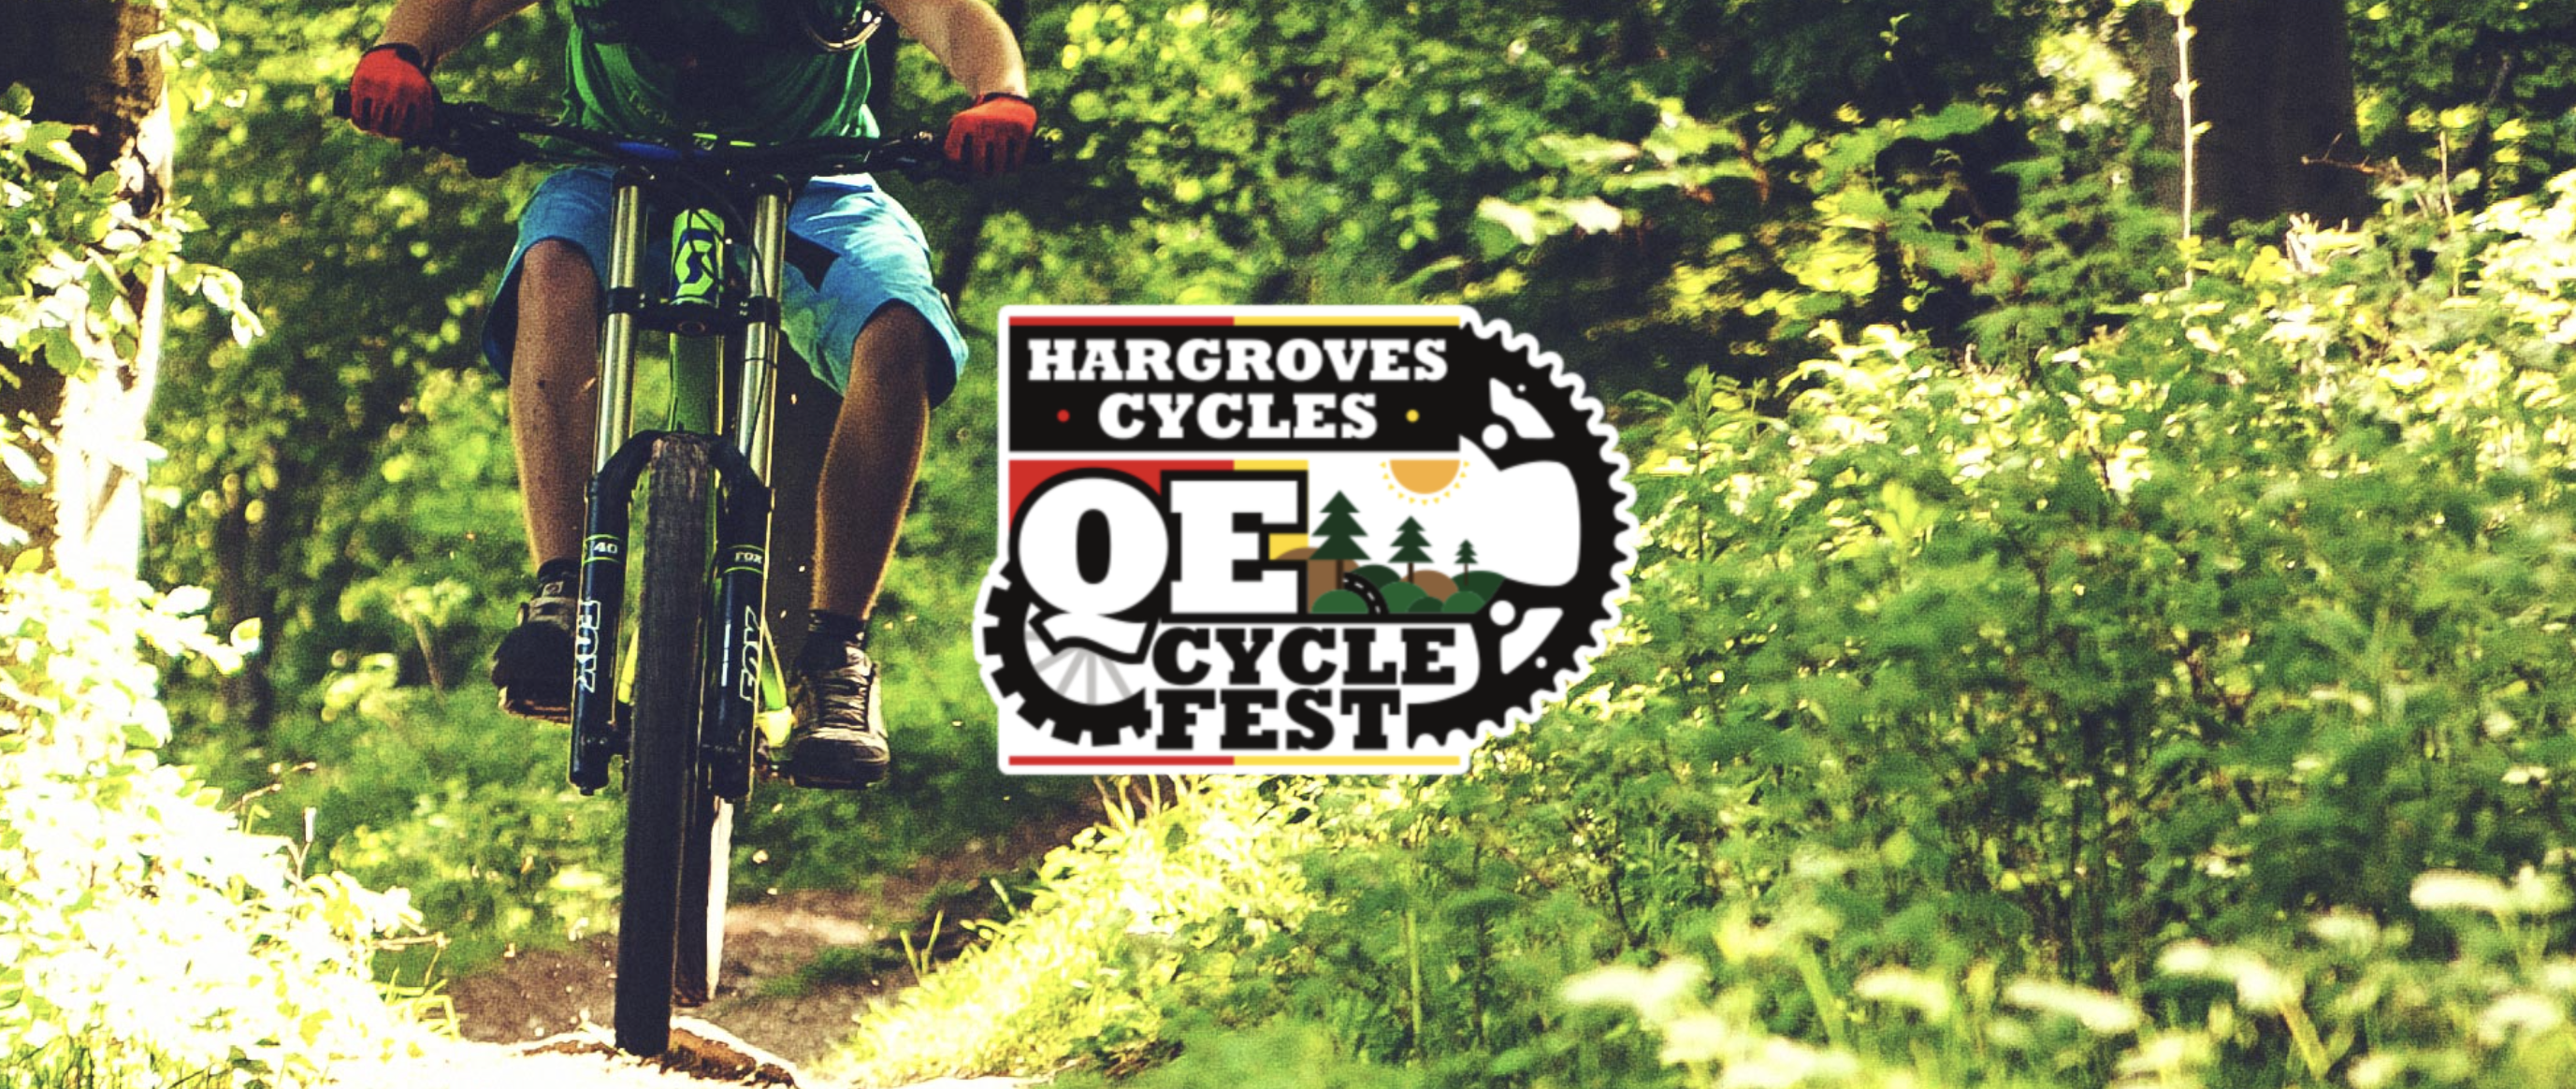 You are currently viewing Hargroves QE Cyclefest